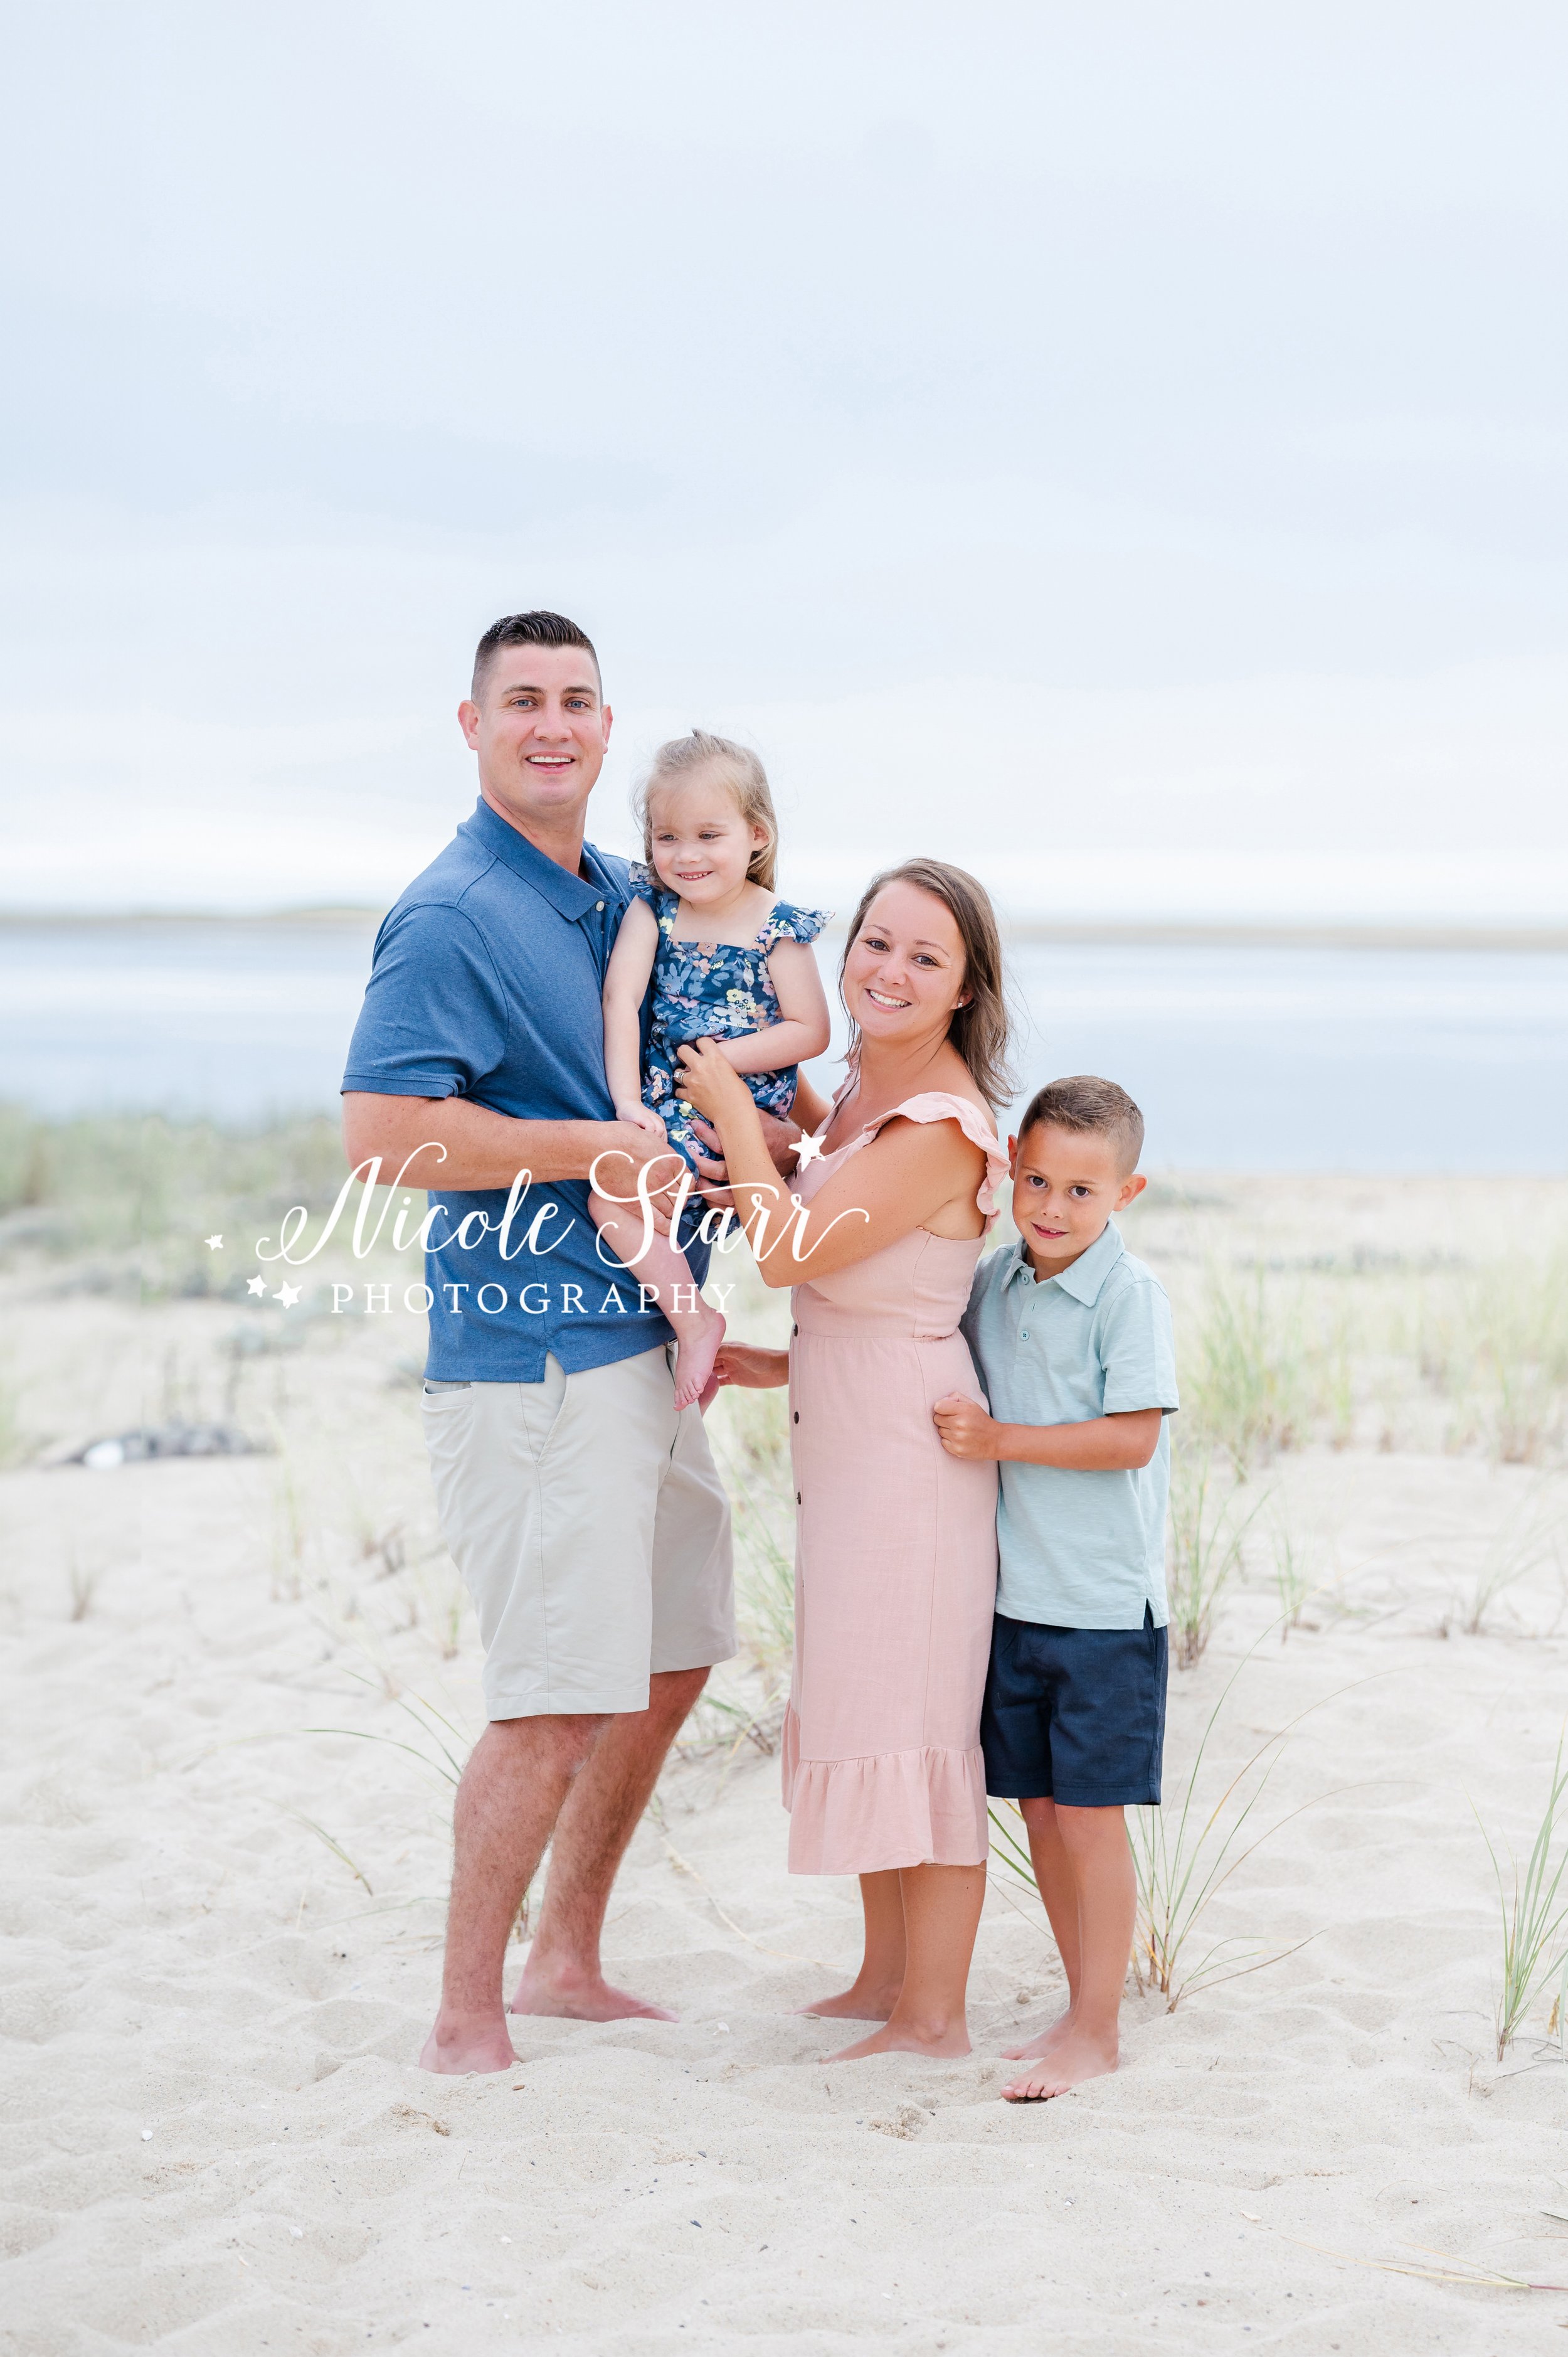 Family posing together at the beach, portrait | Family beach pictures, Beach  family photos, Beach photography family